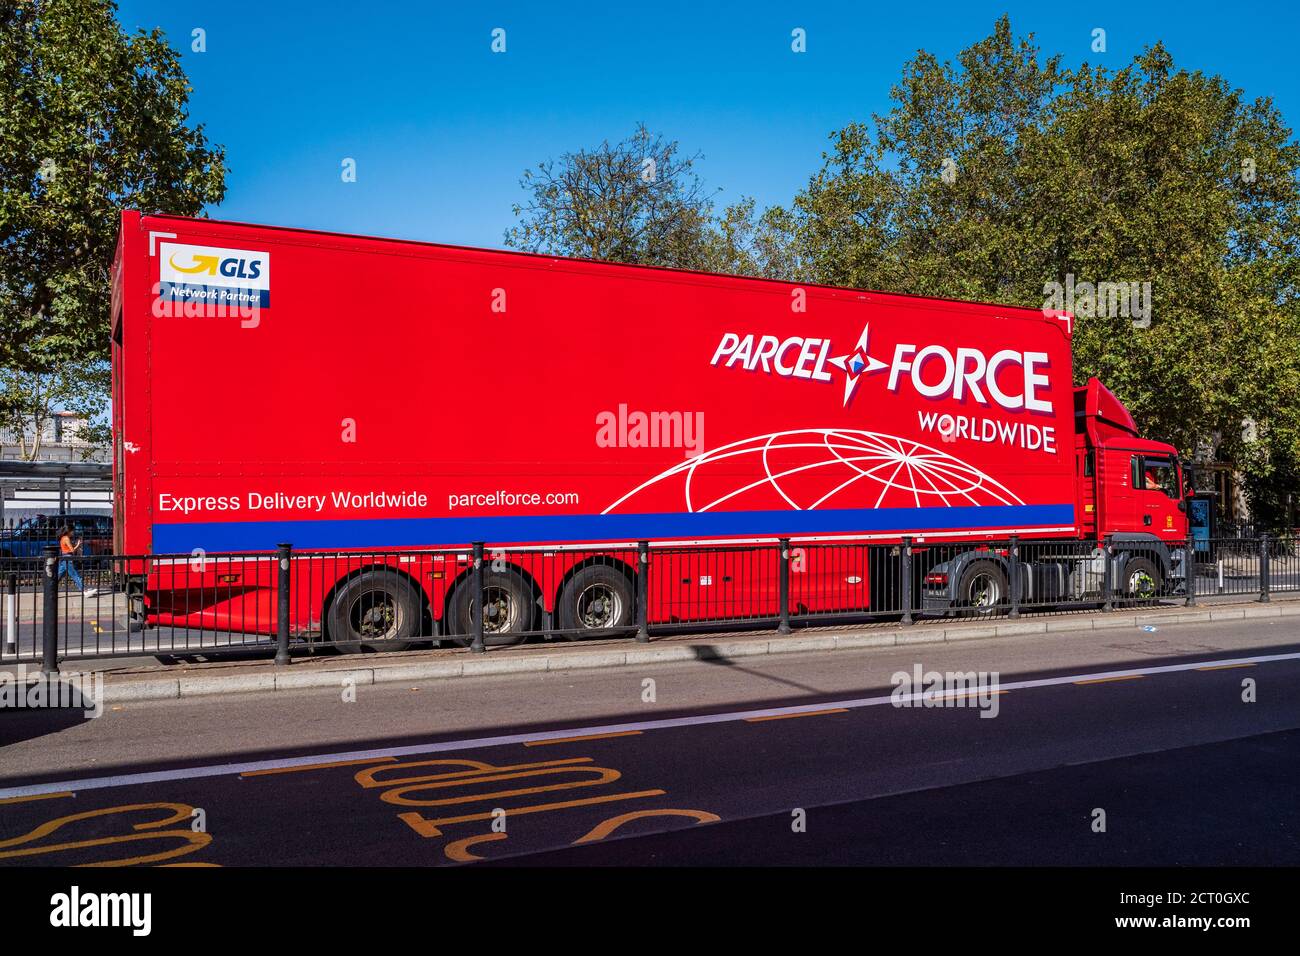 ParcelForce Truck or ParcelForce Lorry in Central London. ParcelForce Worldwide is a subsidiary of Royal Mail. Stock Photo